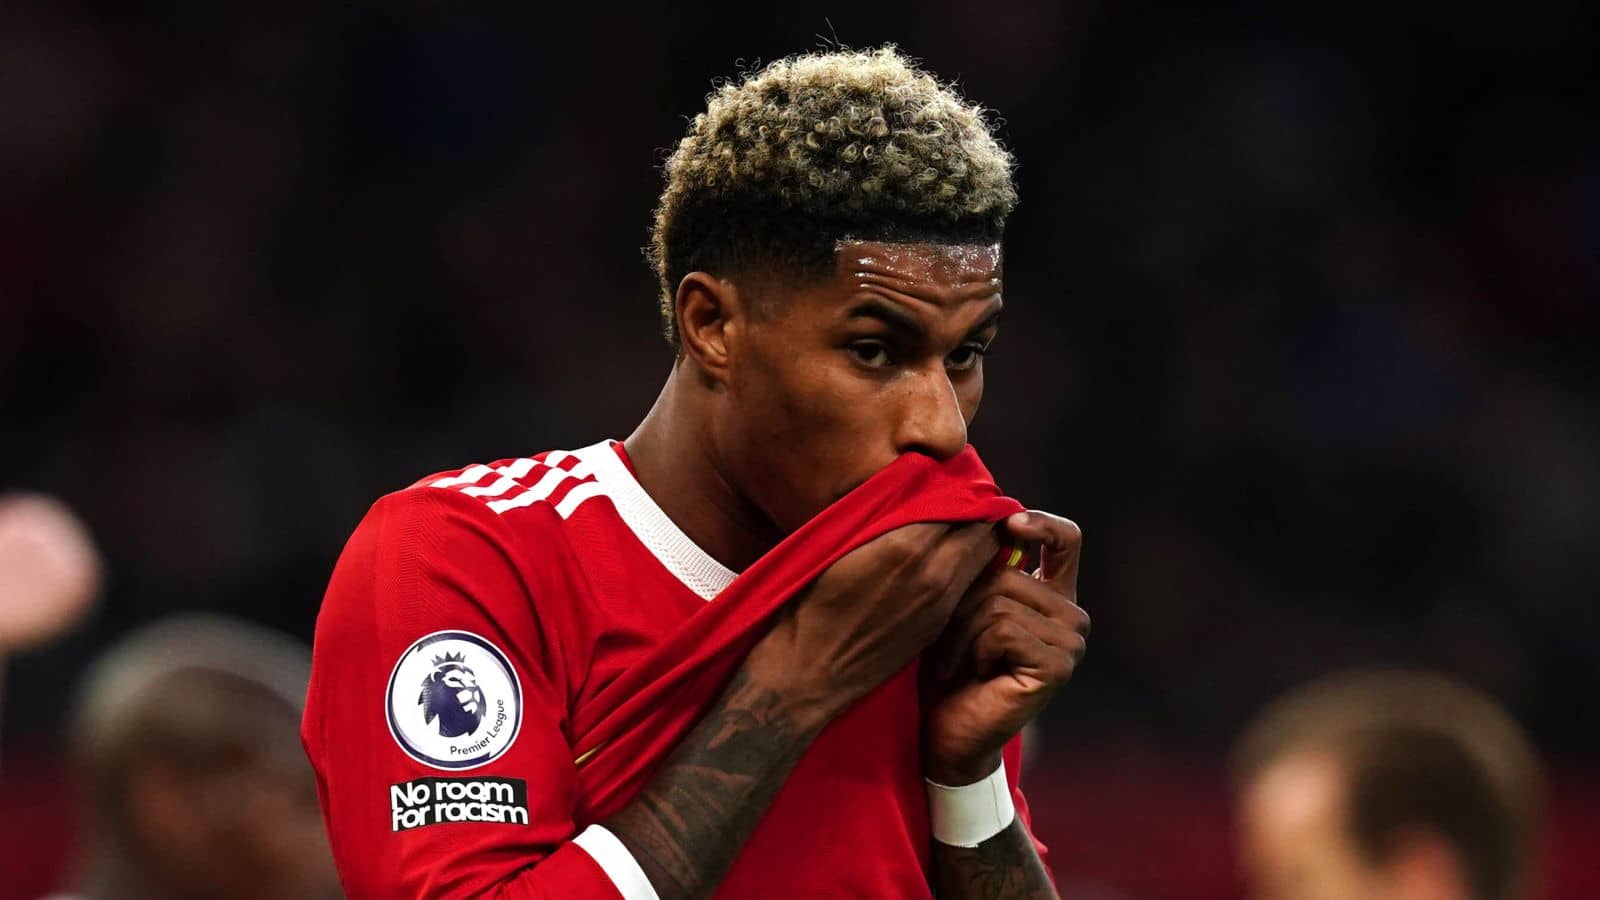 Marcus Rashford reminded he is 'one of the best players' at Man Utd, as iconic former striker gives Ten Hag advice